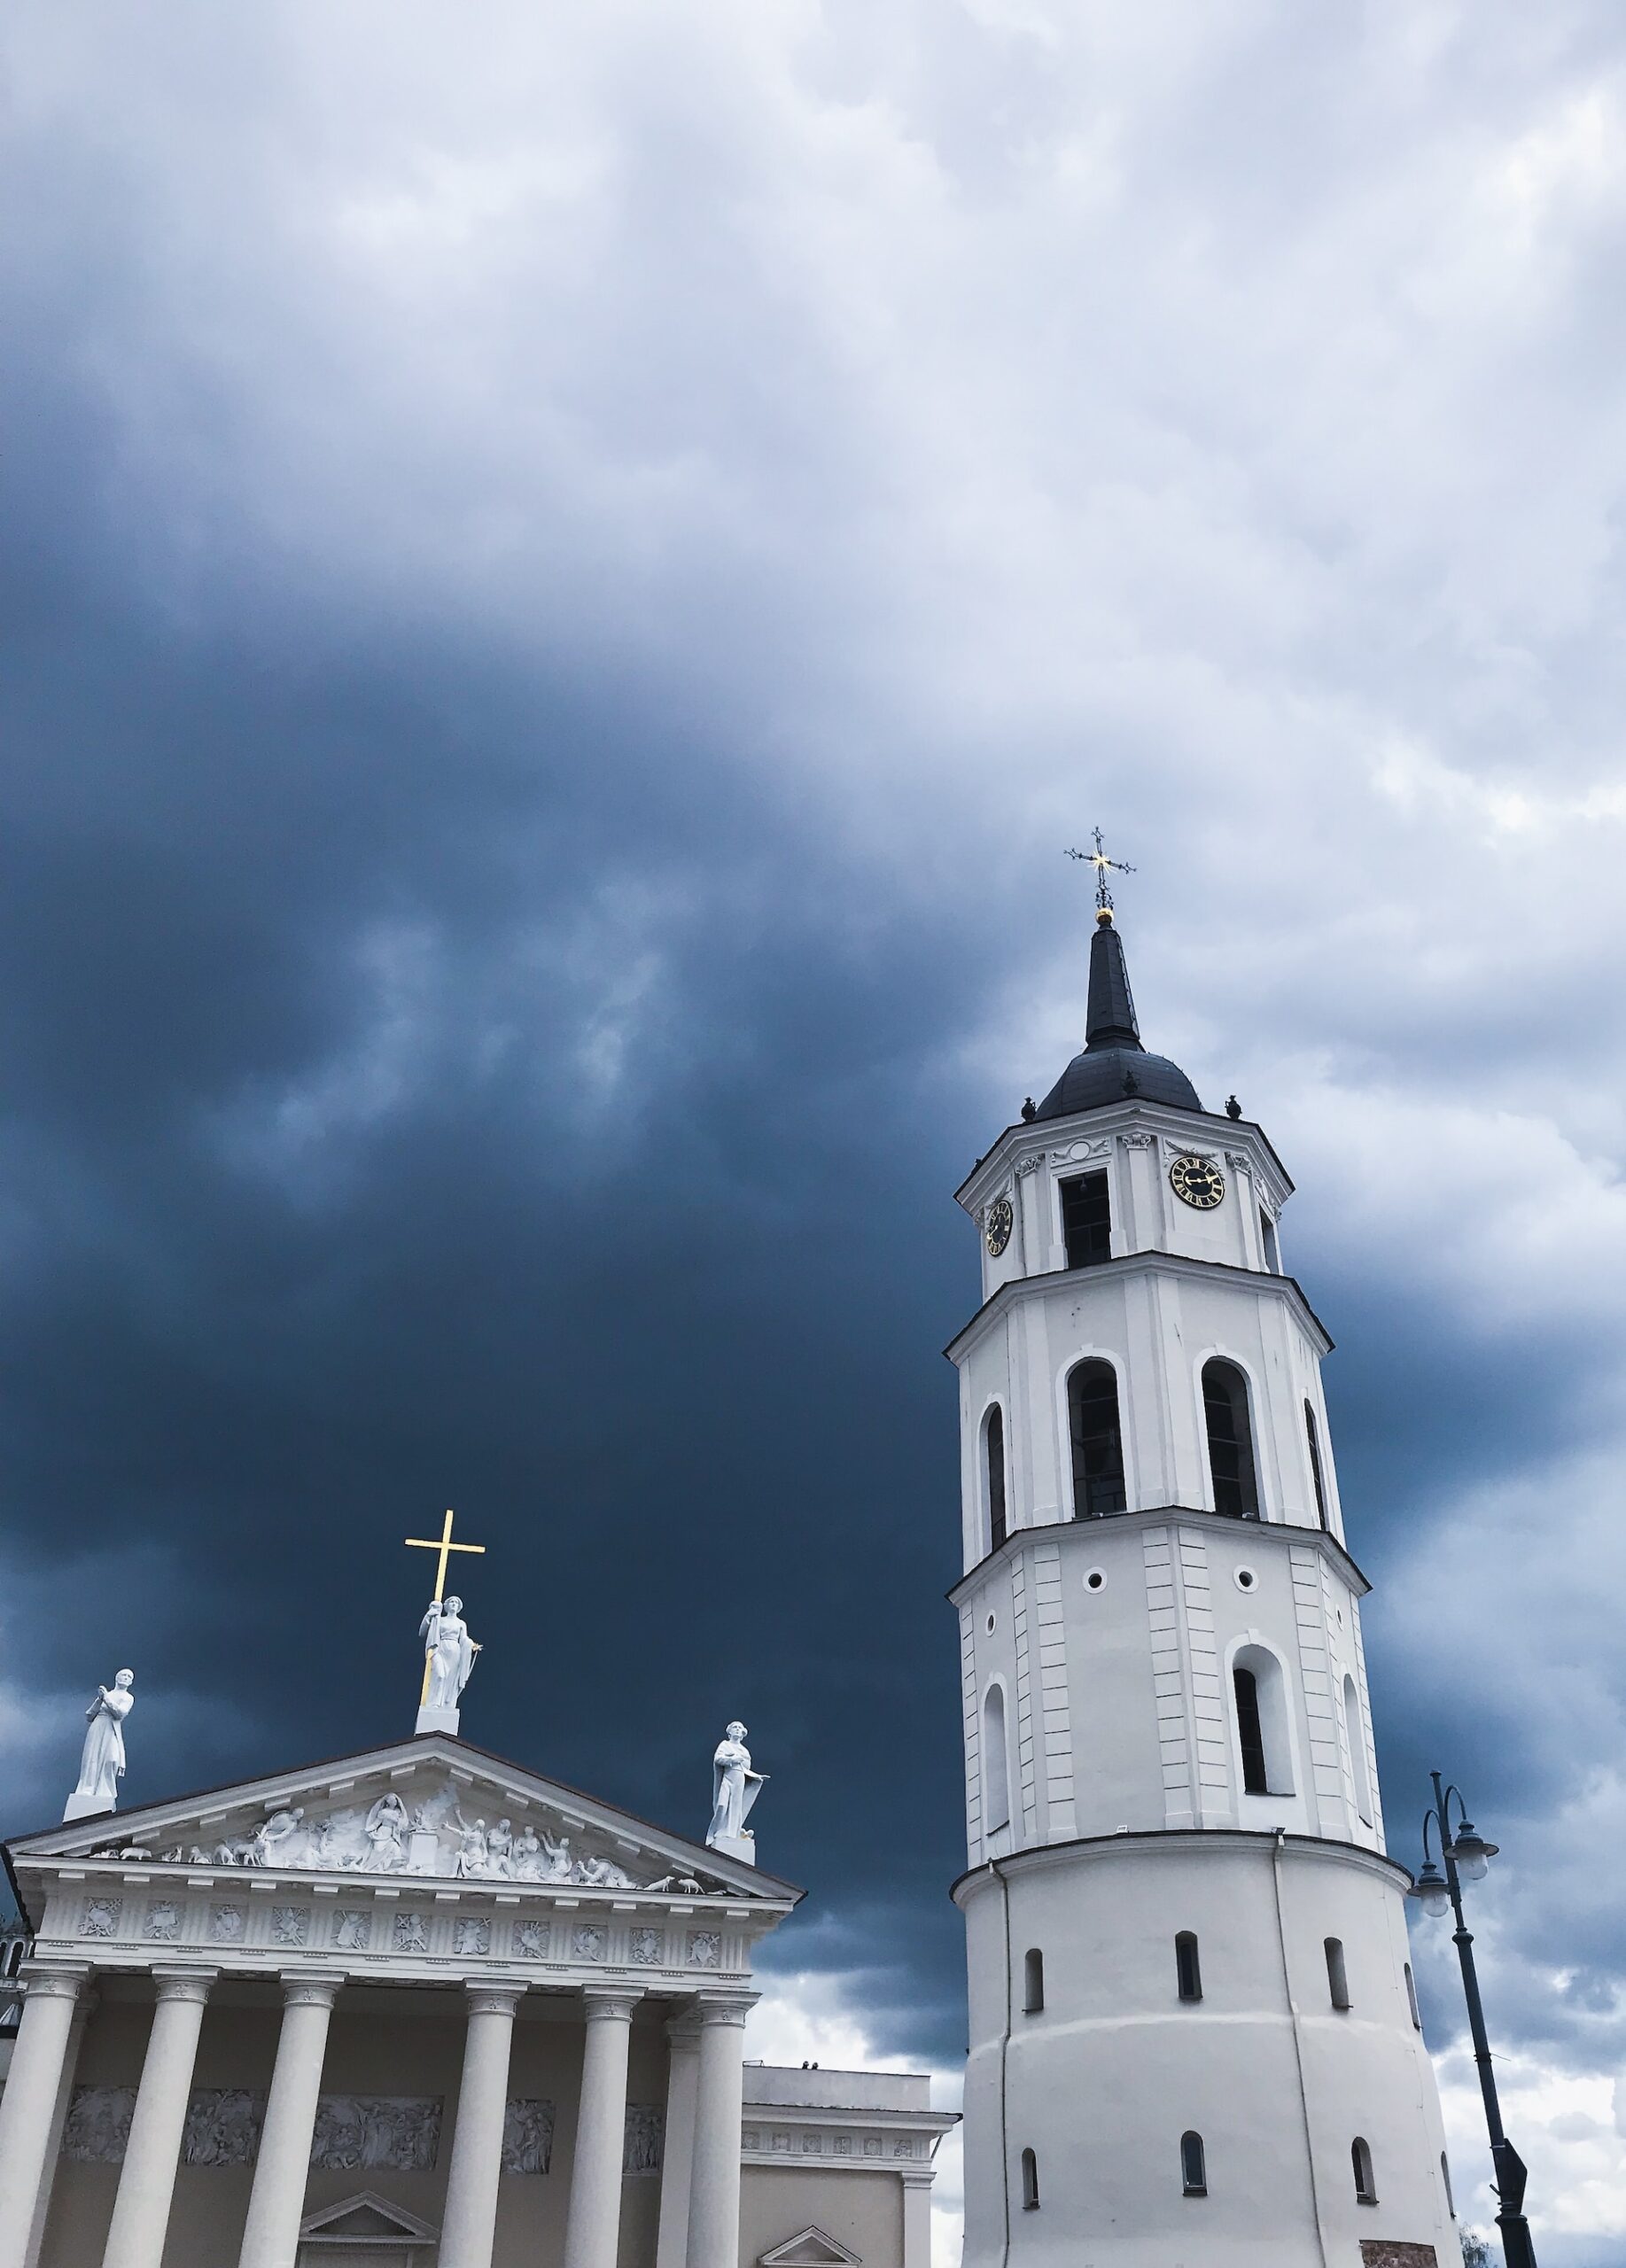 Vilnius church tower and cathedral with grey clouds above.